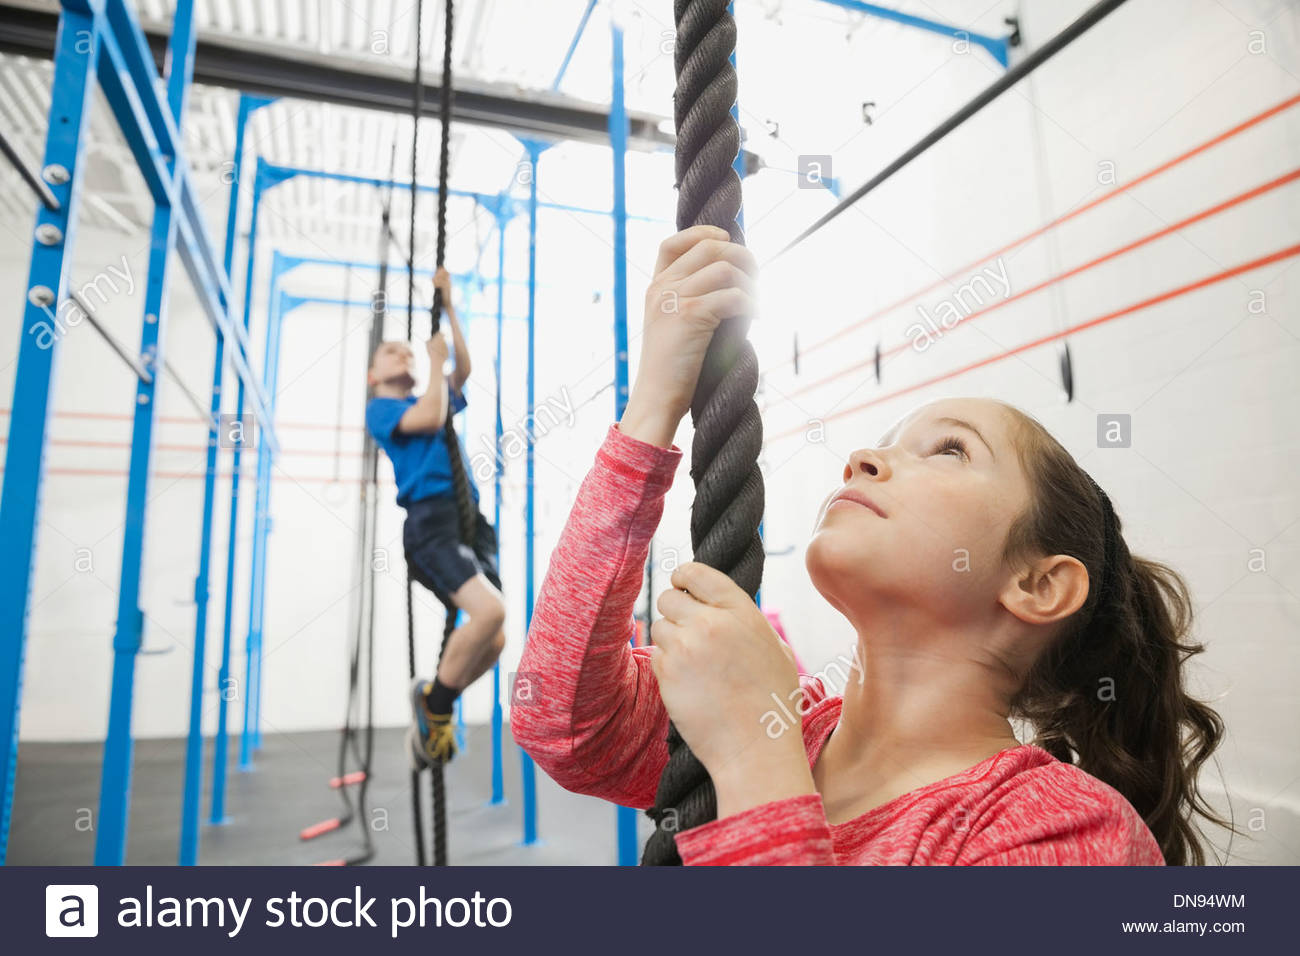 Girl climbing rope in gym Stock Photo